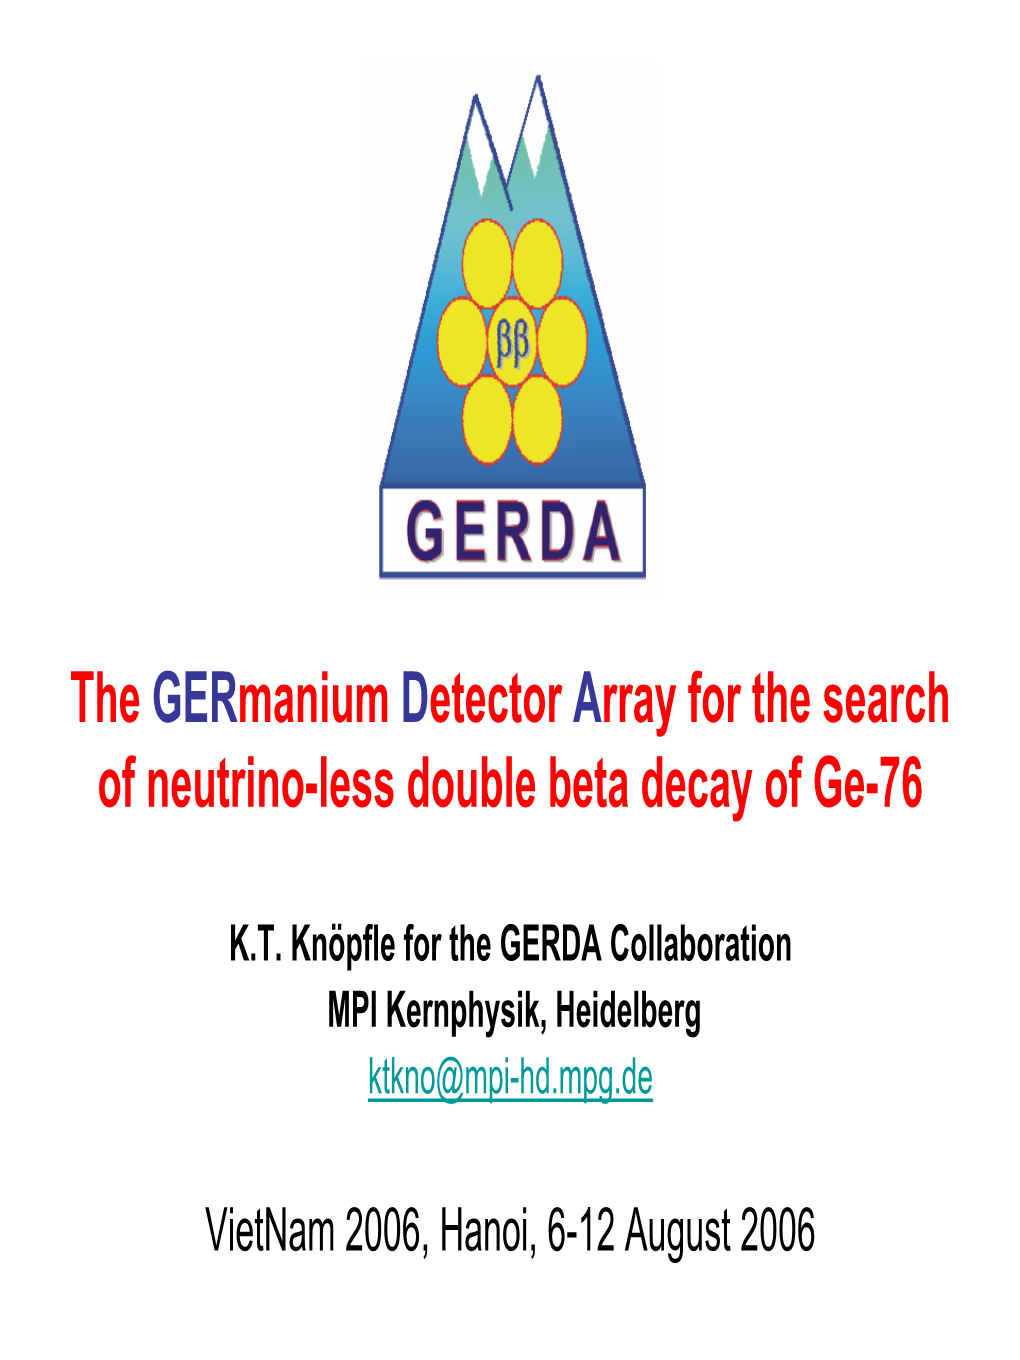 The Germanium Detector Array for the Search of Neutrino-Less Double Beta Decay of Ge-76